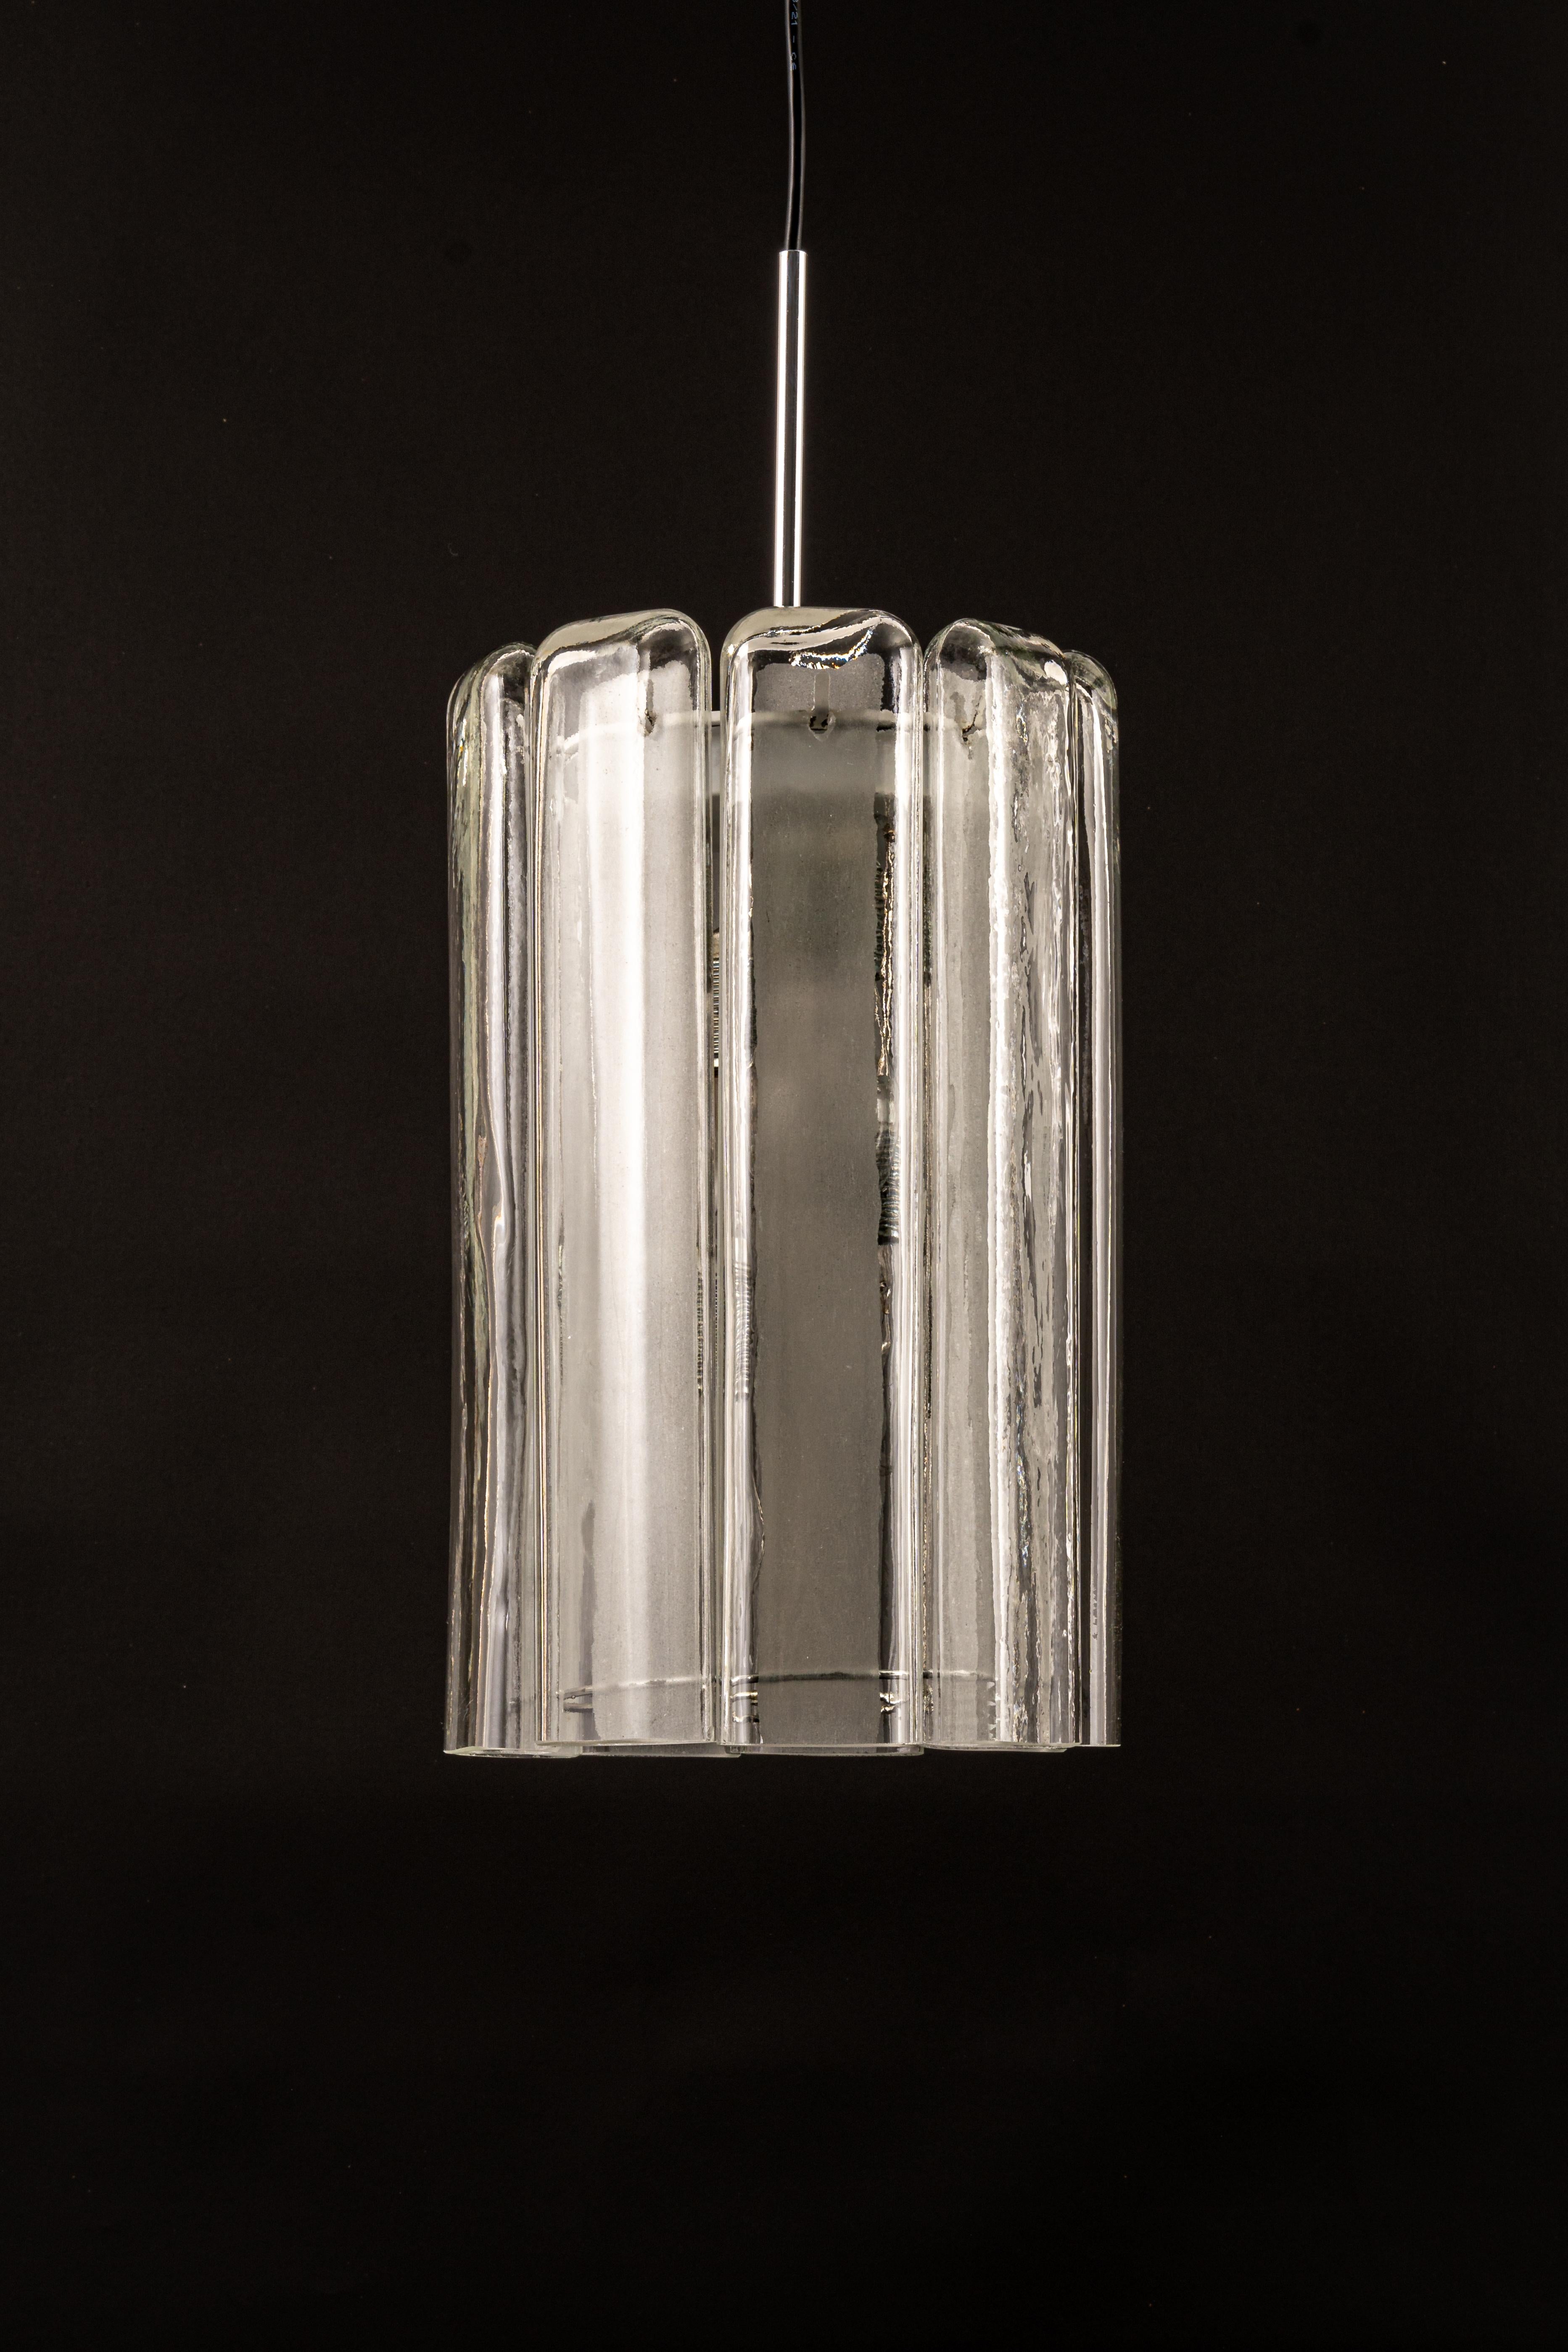 Fantastic cylindrical pendant fixture with crystal glass by Doria, Germany, manufactured, circa 1960-1969. 
Heavy quality and in good condition. Cleaned, well-wired and ready to use. 

The fixture requires 4 x E27 standard bulbs with 80W max for